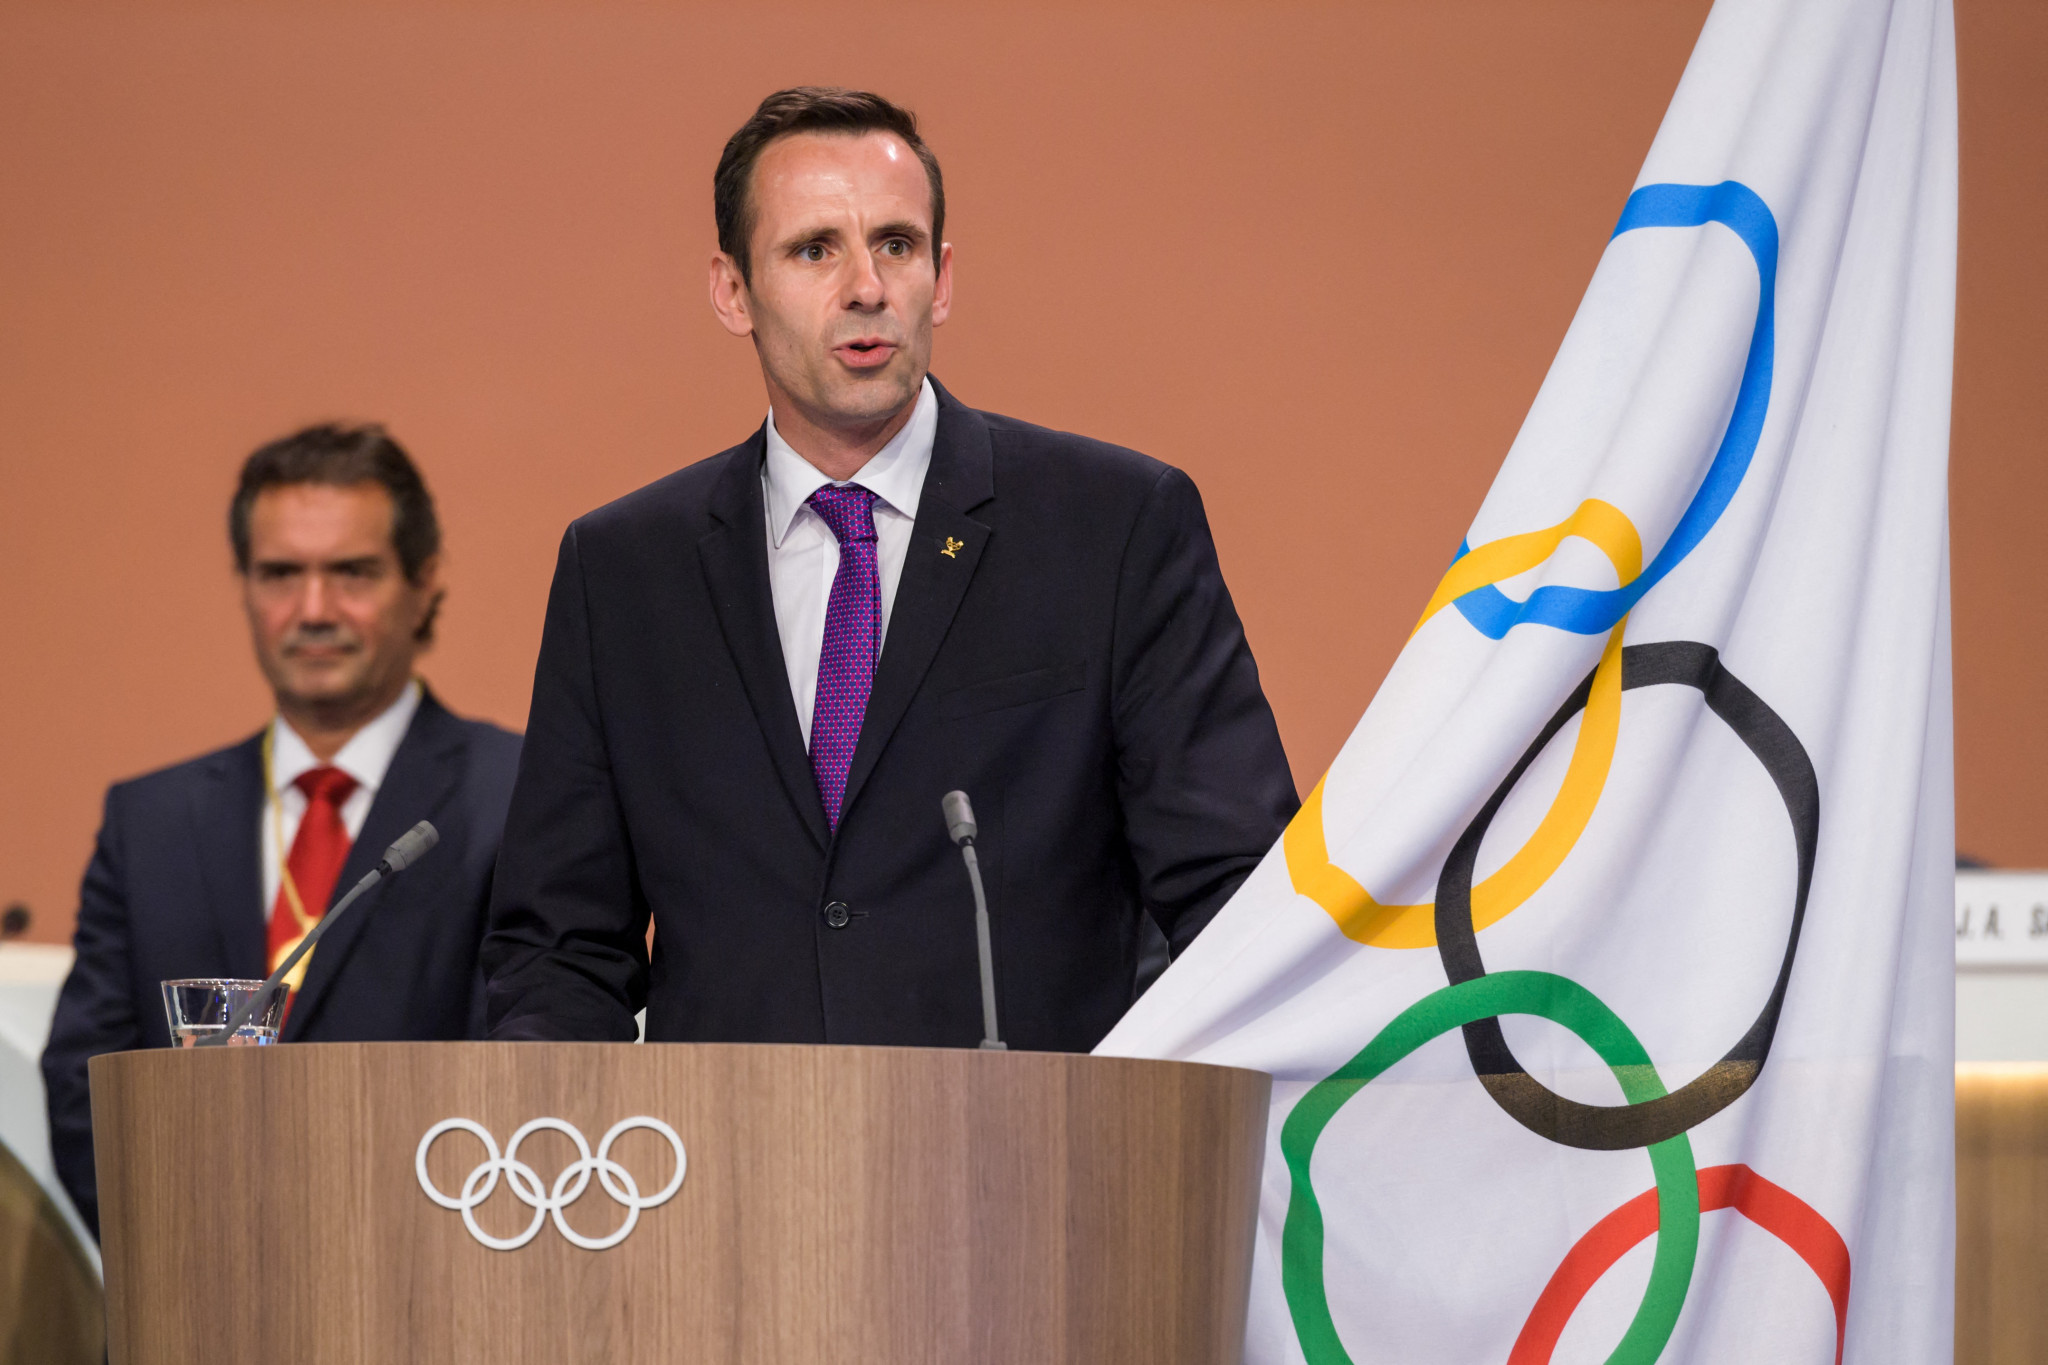 World Rowing President and IOC member Jean-Christophe Rolland admitted maintaining a ban on Russian and Belarusian athletes 